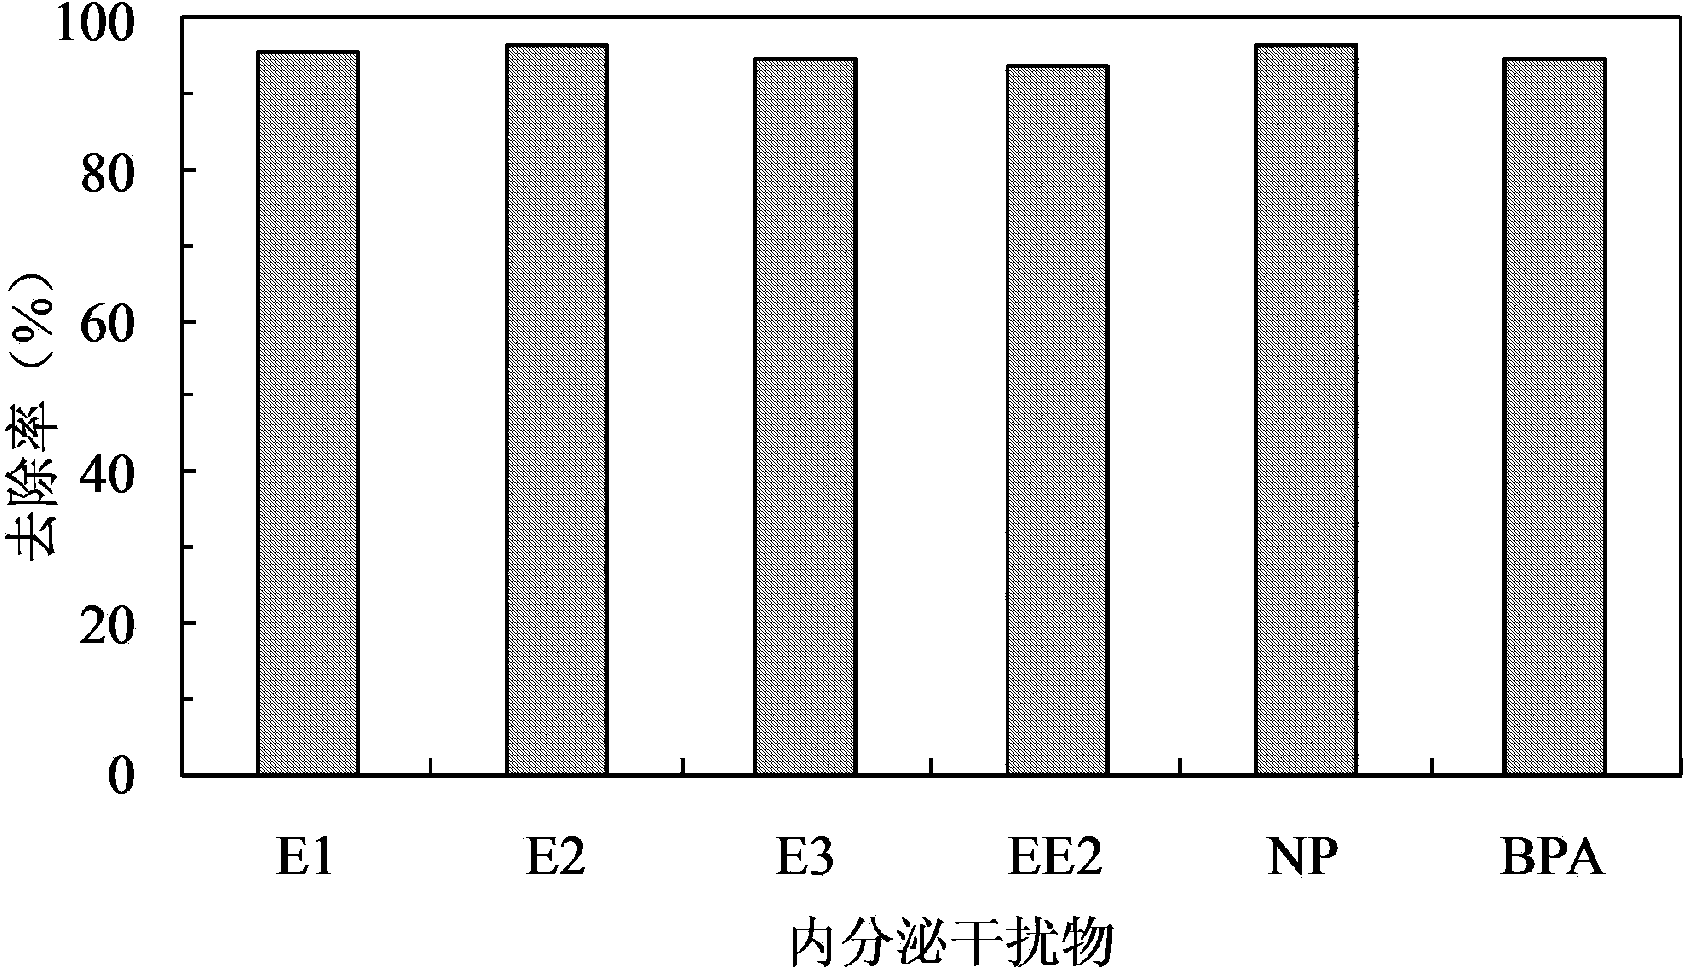 Water treatment composite agent and water treatment method for removing organic pollutants by oxidation with highly active singlet oxygen